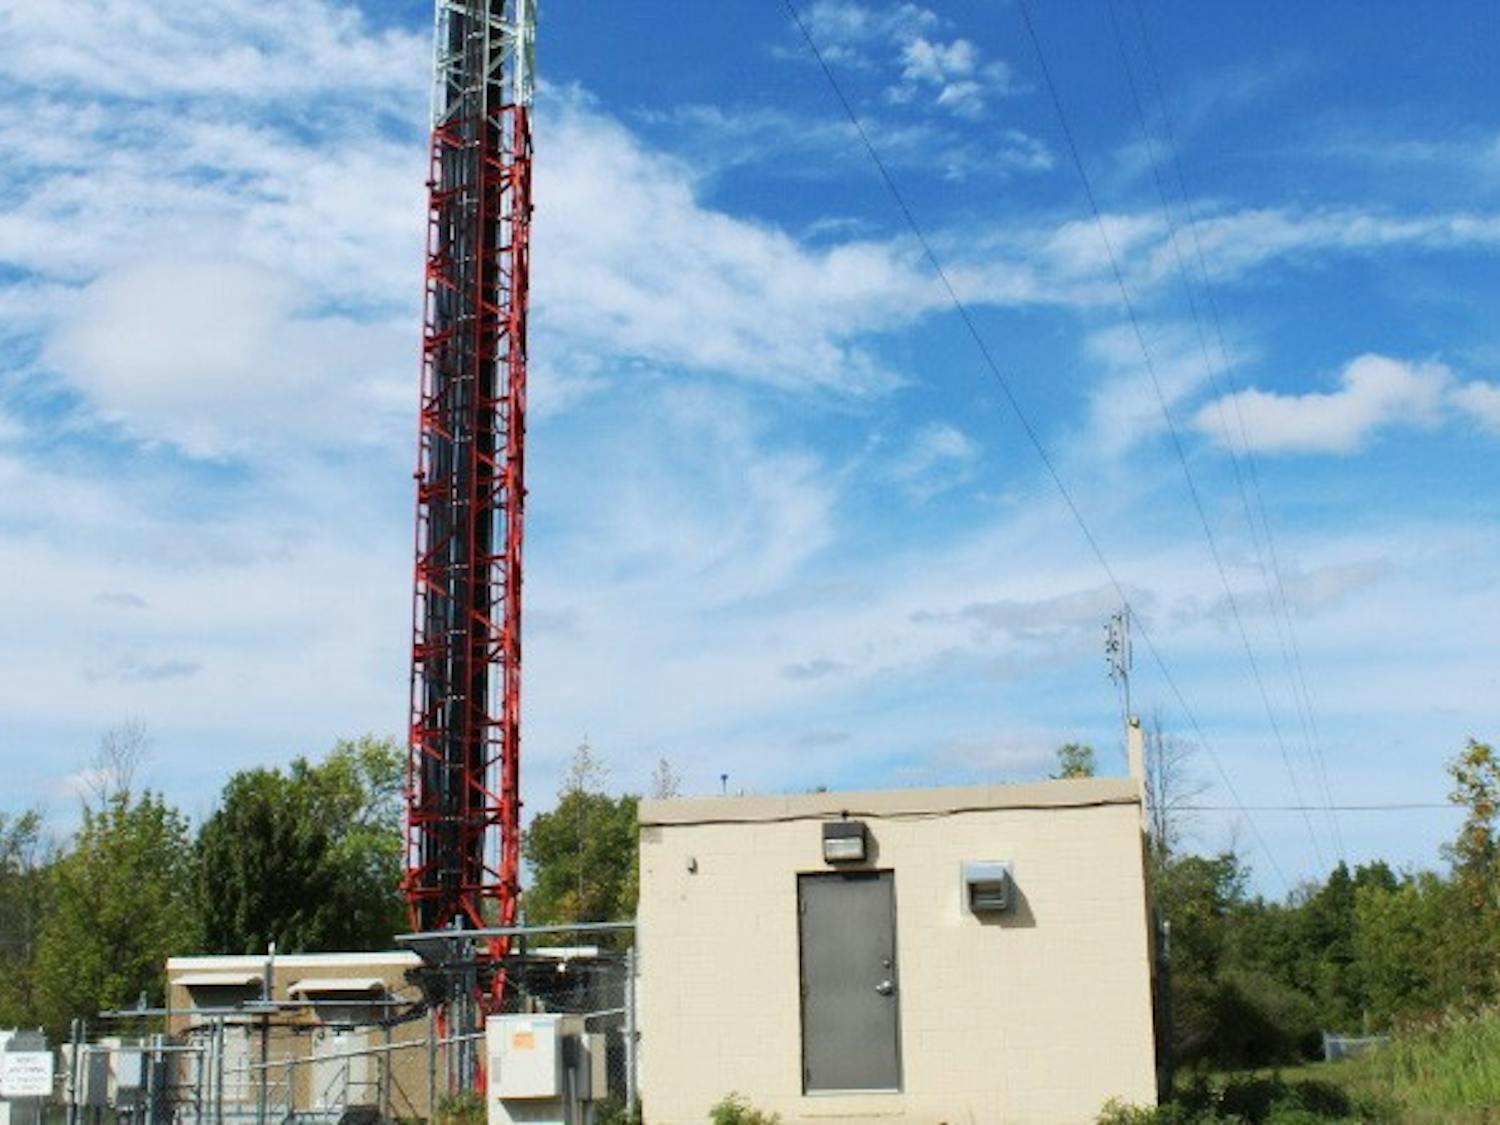 UB’s radio tower, adjacent to the Millersport Highway, stands over 400-feet high. The tower hosts six tenants from around Western New York, including WNED/WBFO, Verizon and Transwave Communications Systems.